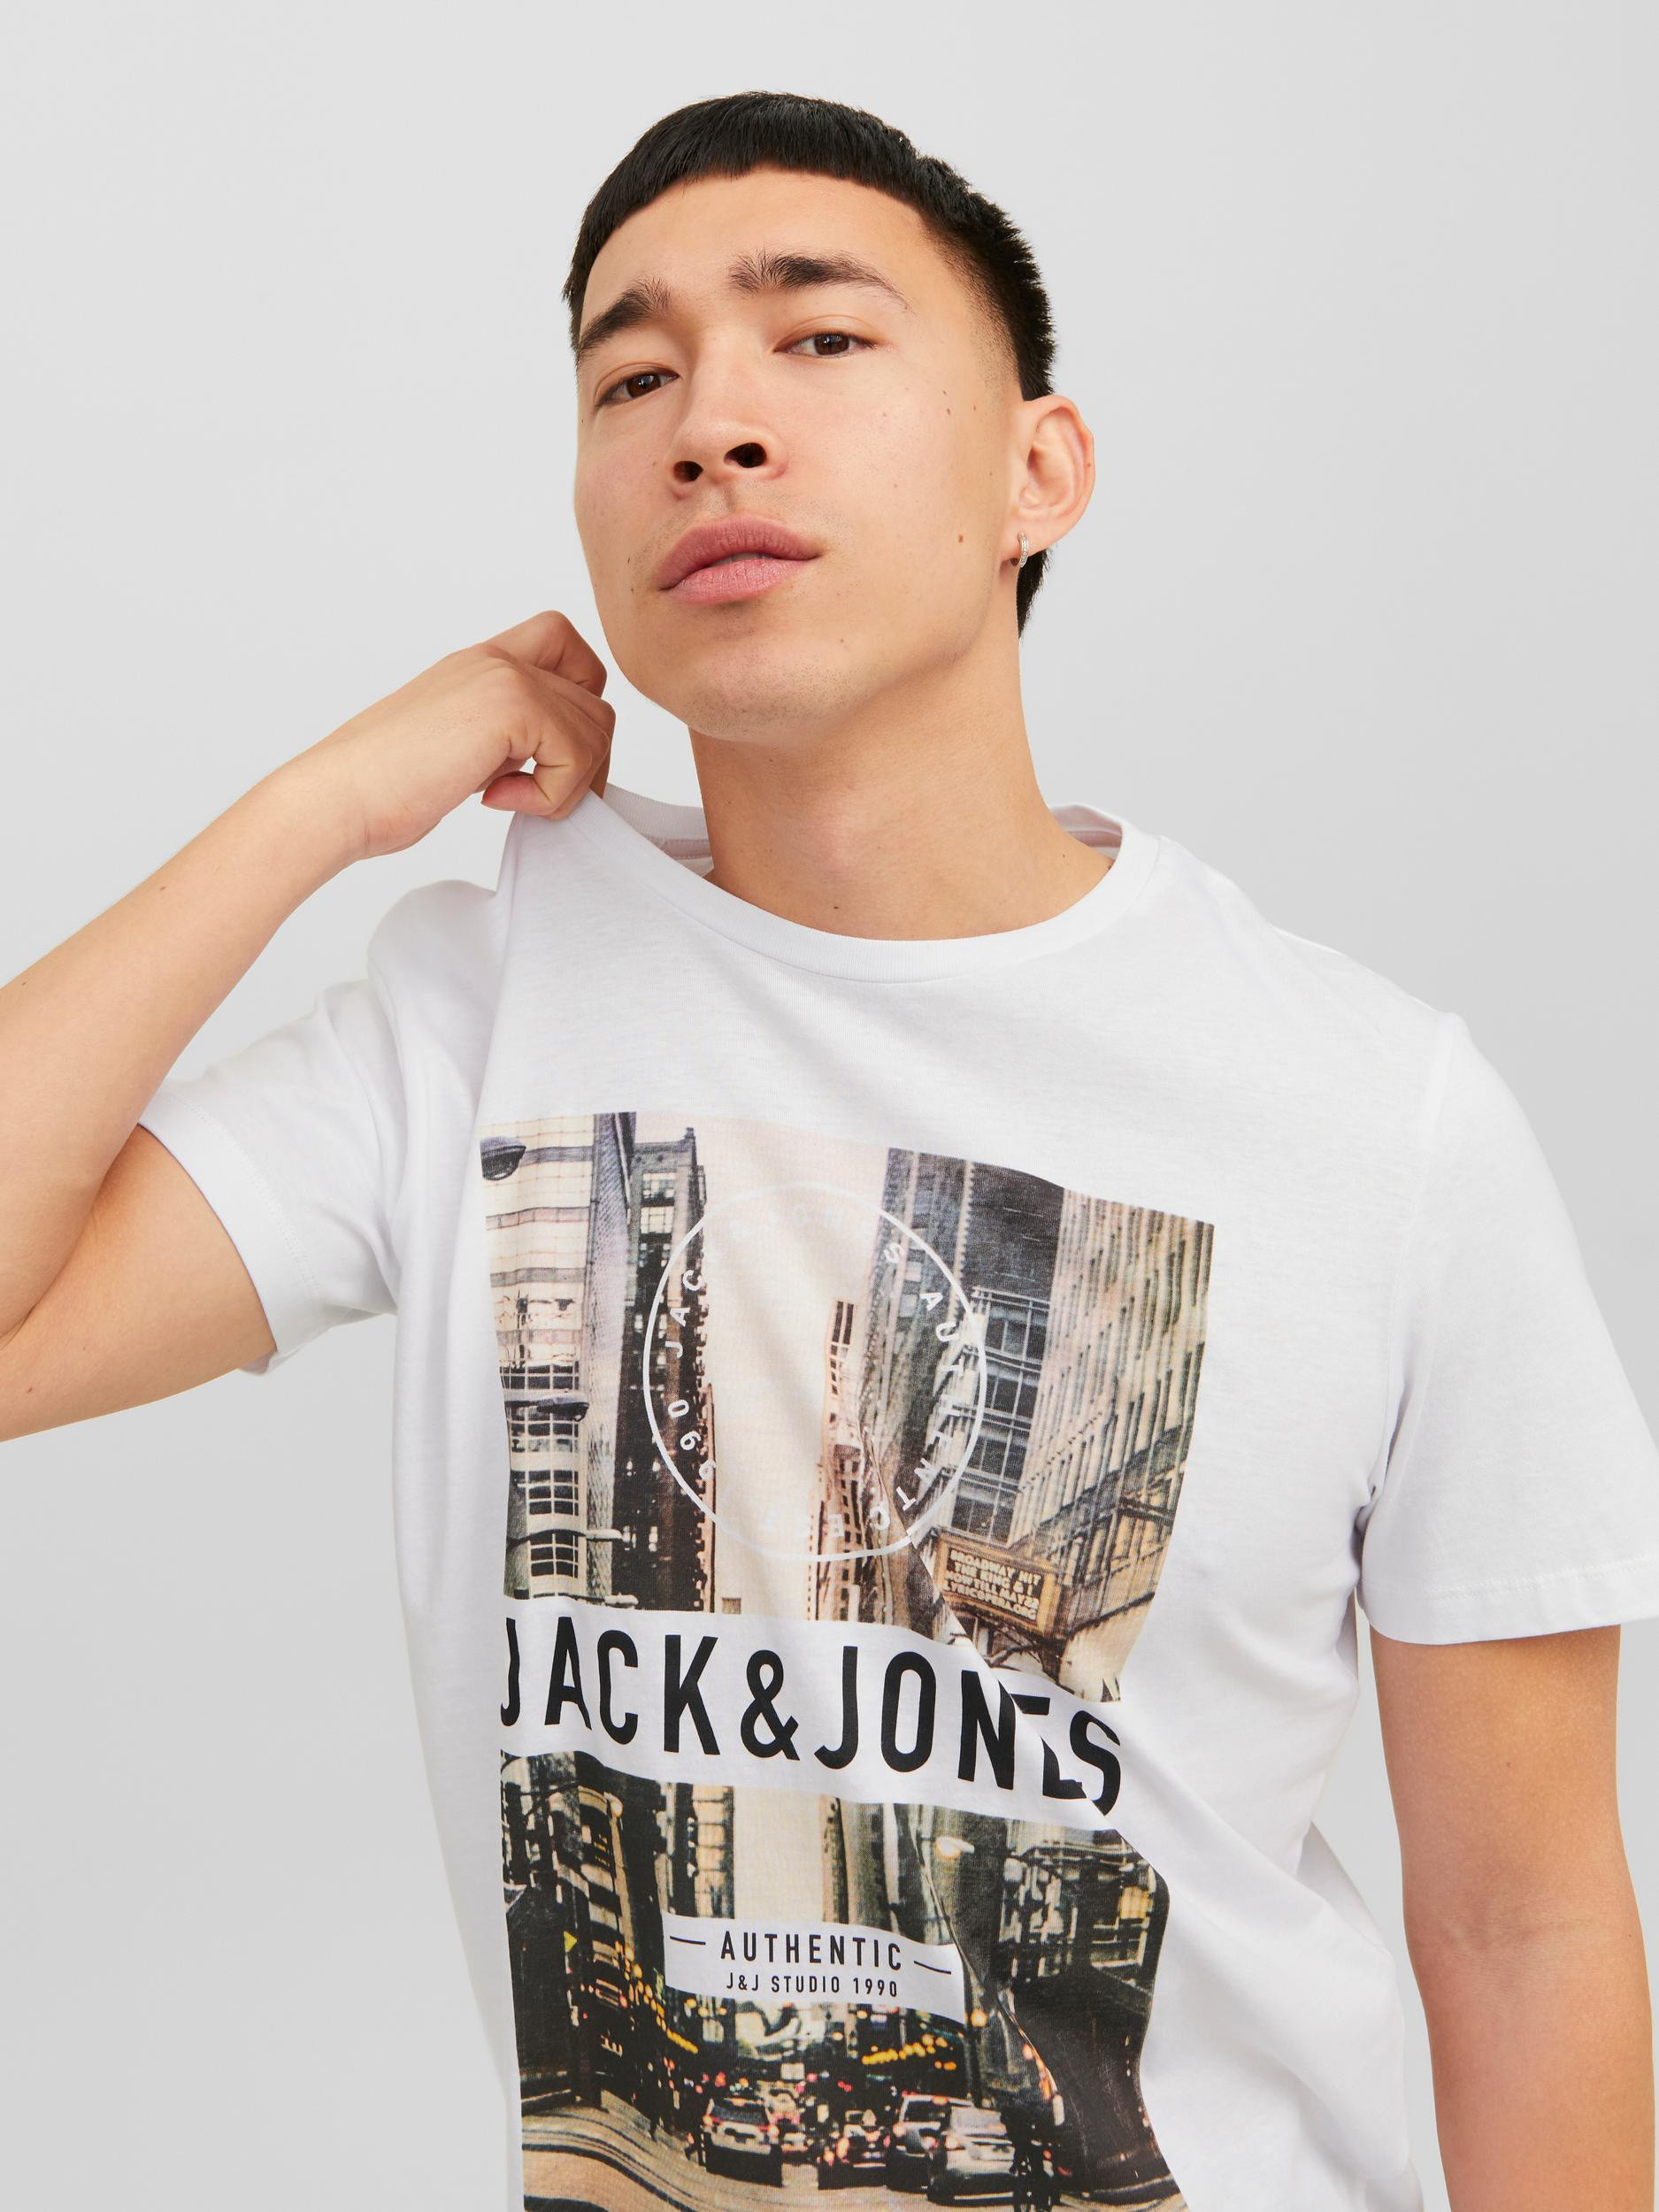 Jack & Jones -T-shirt in cotone con stampa, Bianco, large image number 4